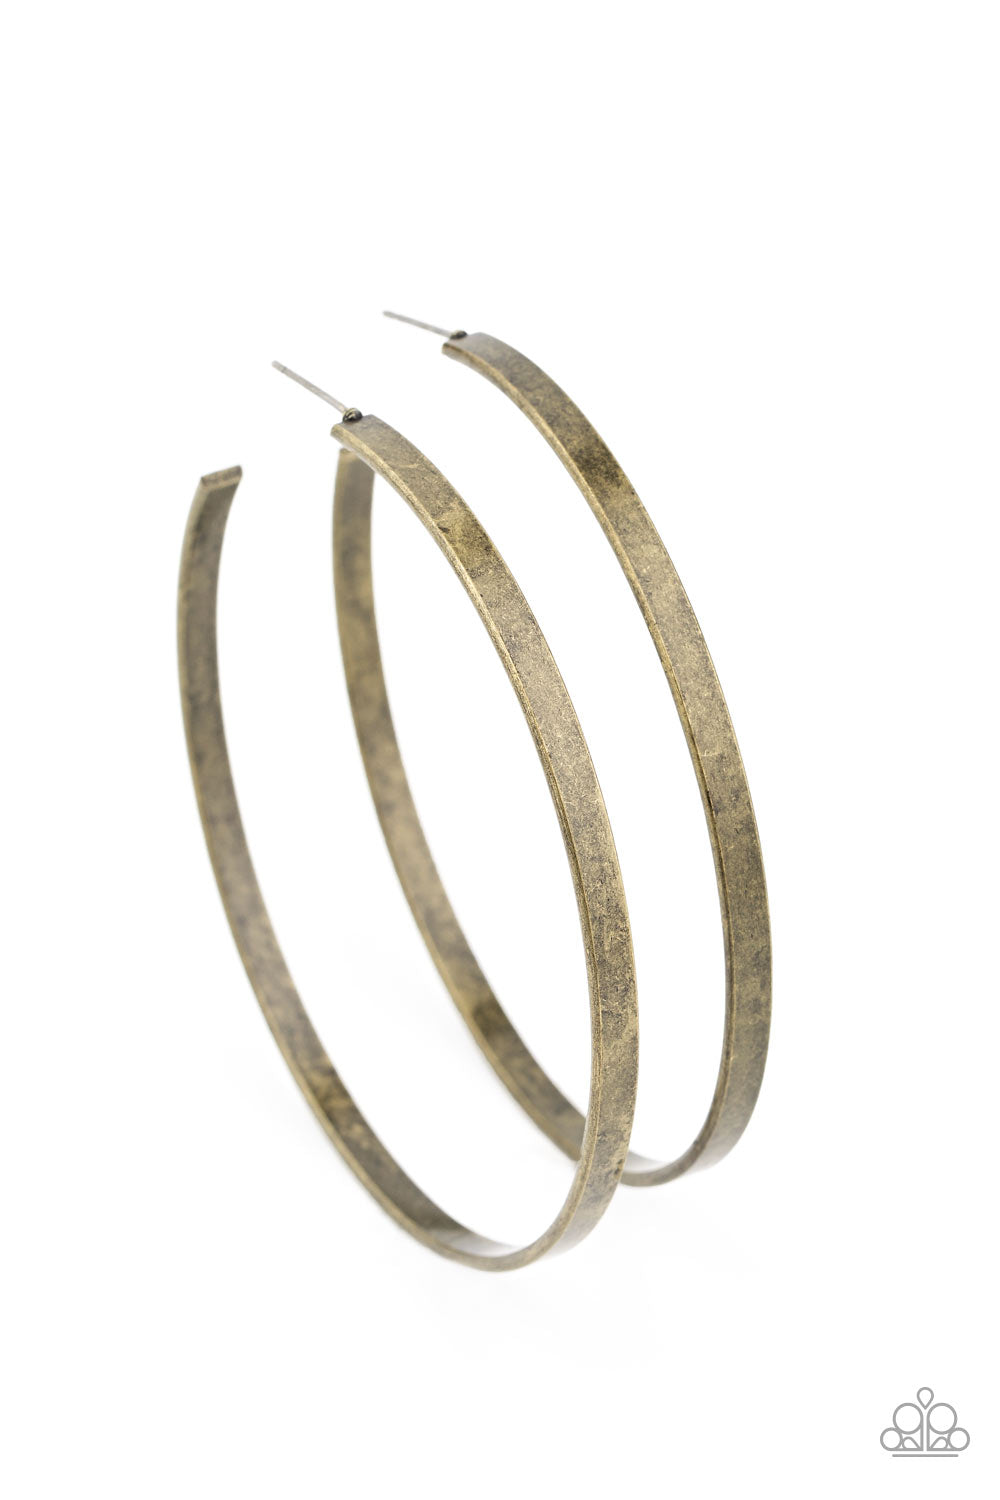 Lean Into The Curves - Brass Hoop Earrings- Paparazzi Accessories